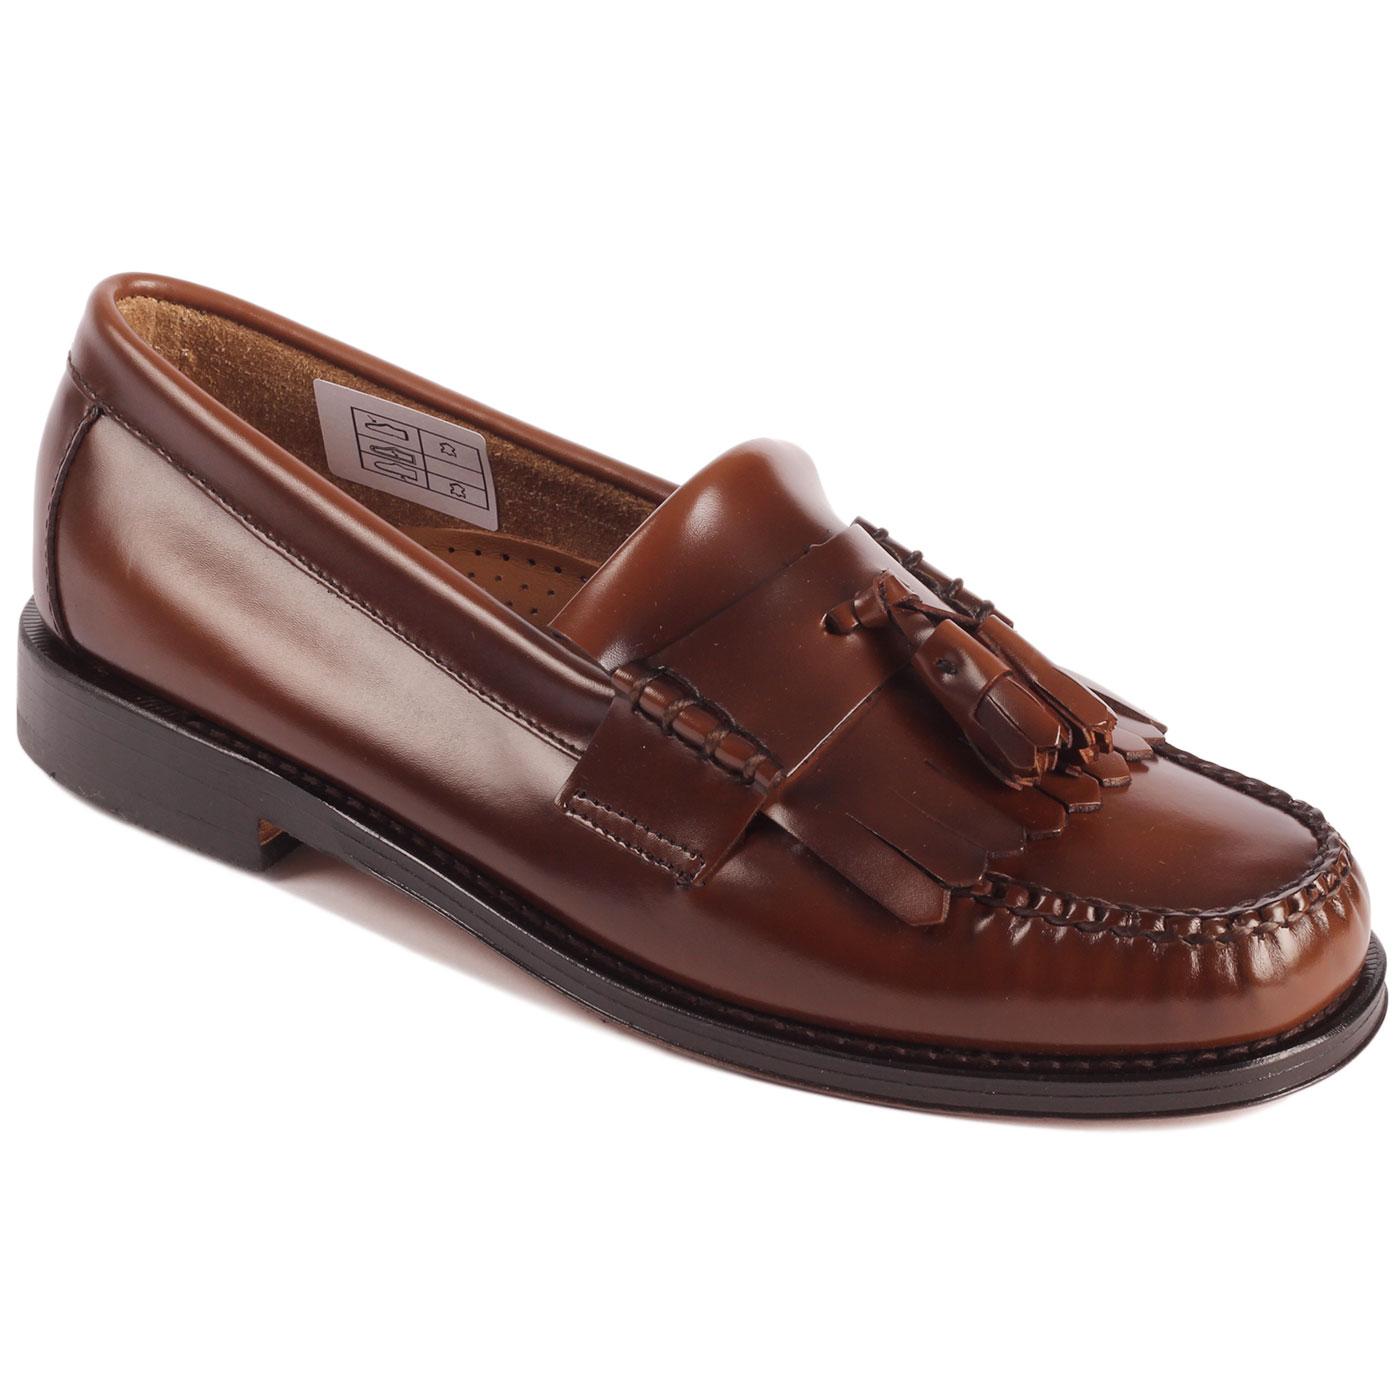 Heritage Layton BASS WEEJUNS Kiltie Loafers BROWN